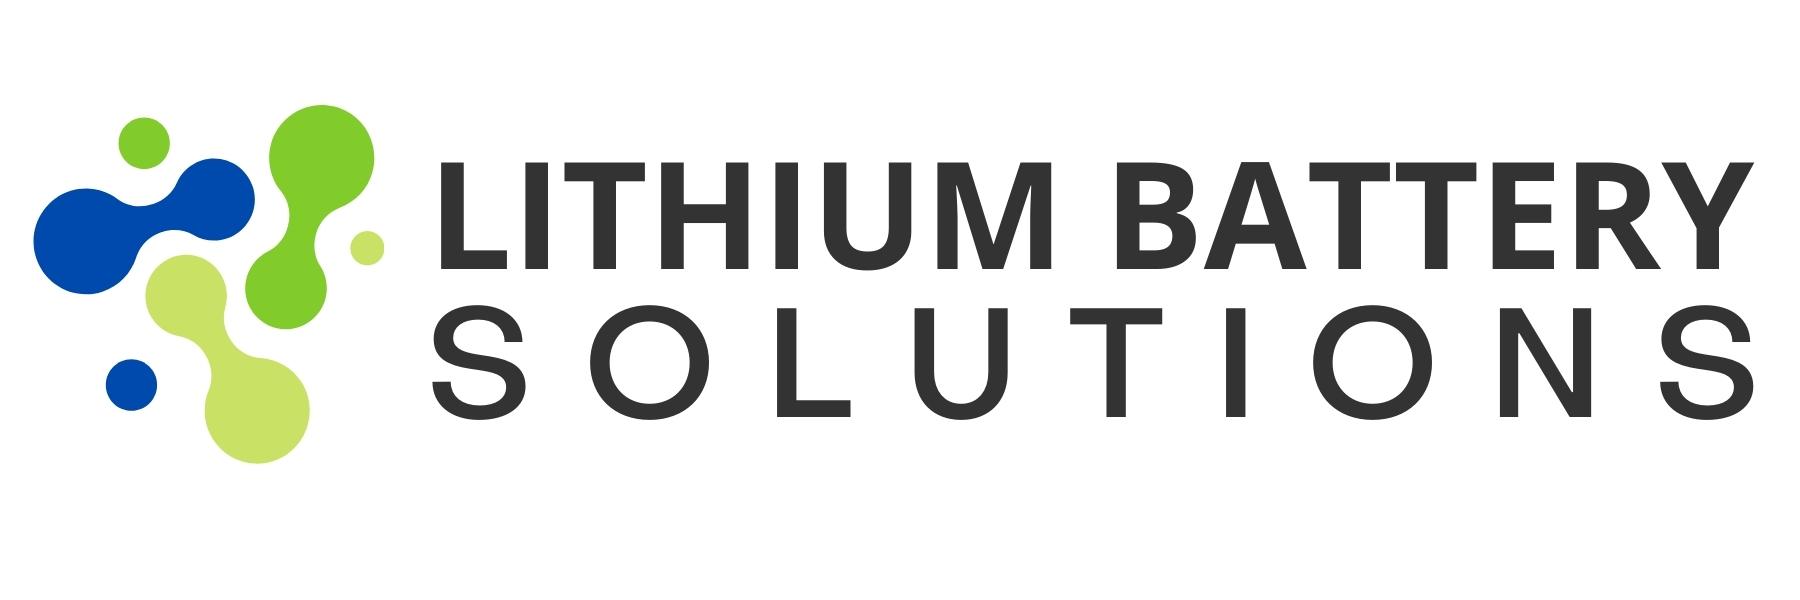 Lithium Battery Solutions Logo